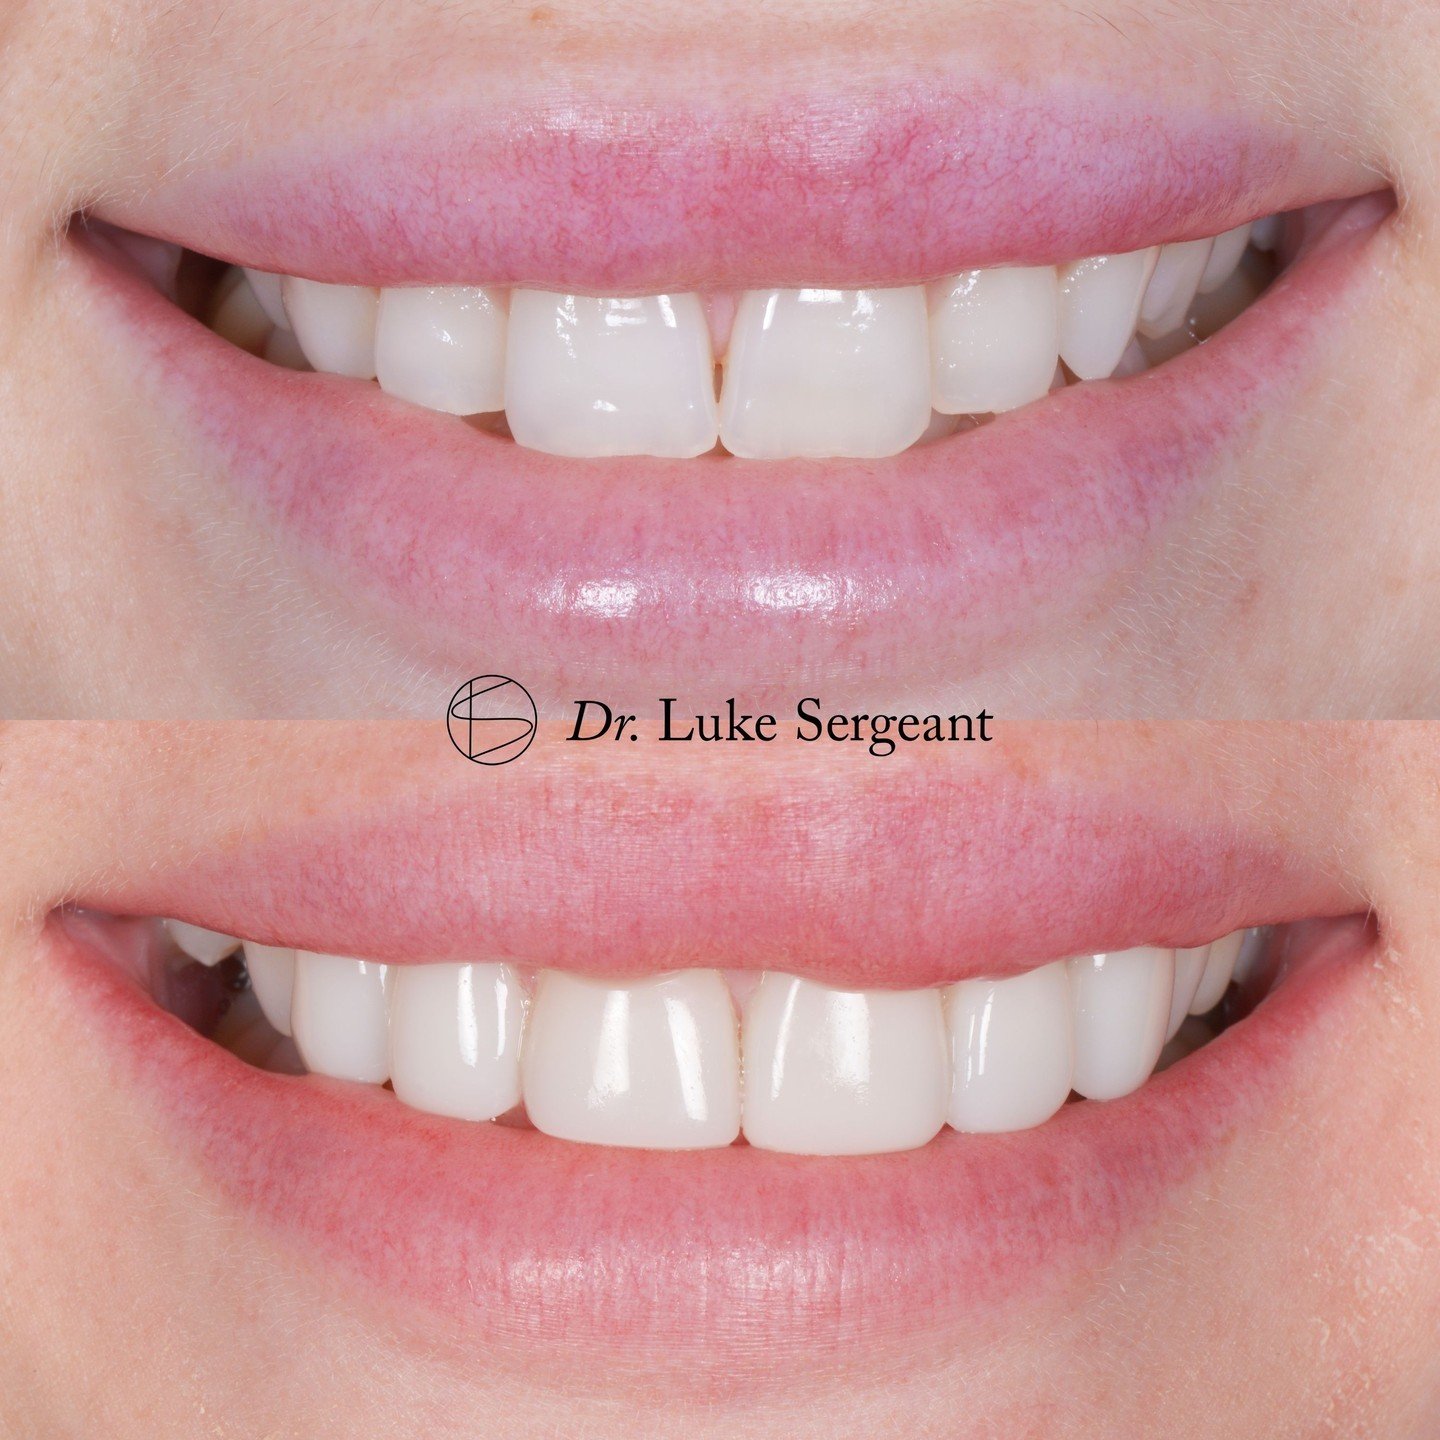 Big changes start with small steps. Our latest client's journey included Invisalign and composite bonding on 6 teeth, leading to a truly great smile. See the difference for yourself. Thinking about a change? Raby Road Dental is here to help. ✨

#comp